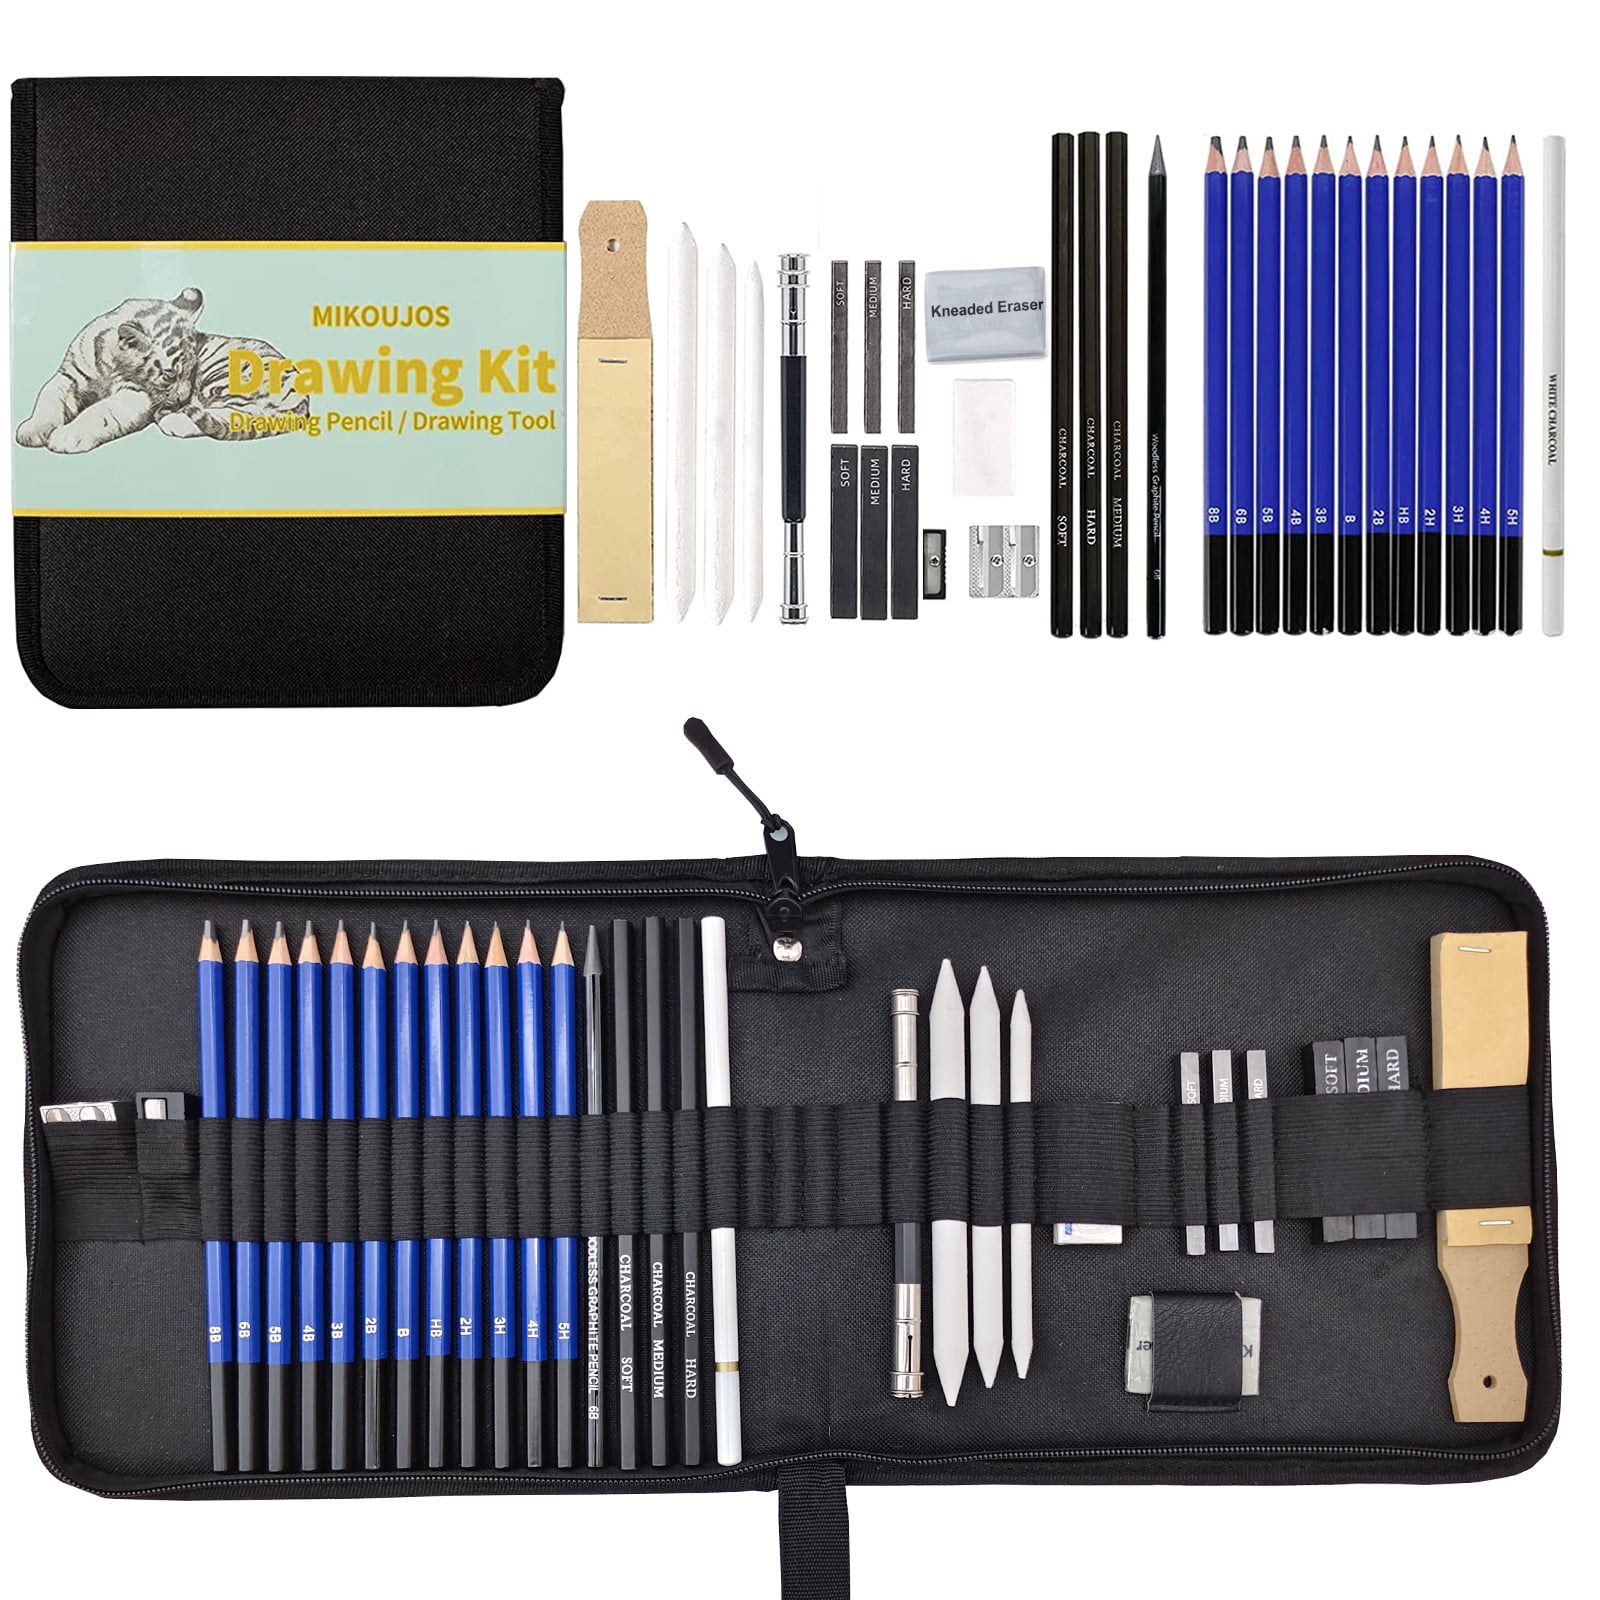 Drawing Pencils Set - Drawing Supplies Kit with Sketch Pencils for drawing  (Graphite Art Pencils), Charcoal Pencils, Kneaded Eraser, Pencil sharpener